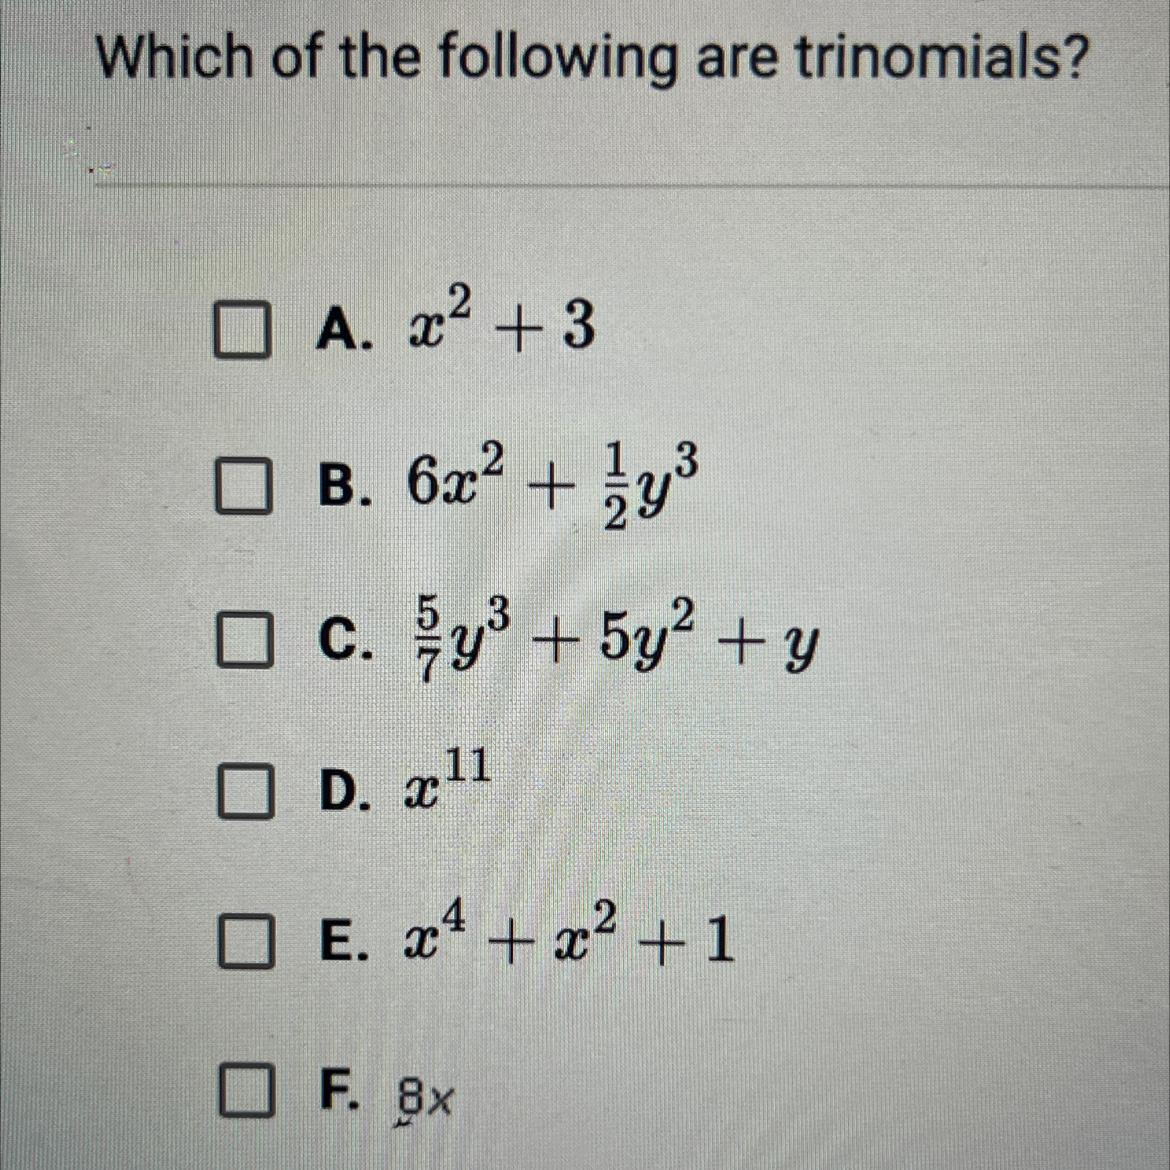 Pls Help!! Which Of The Following Are Trinomials? A. X + 3 B. 6x + Y C. /7y + 5y + Y D. X E. X + X +1